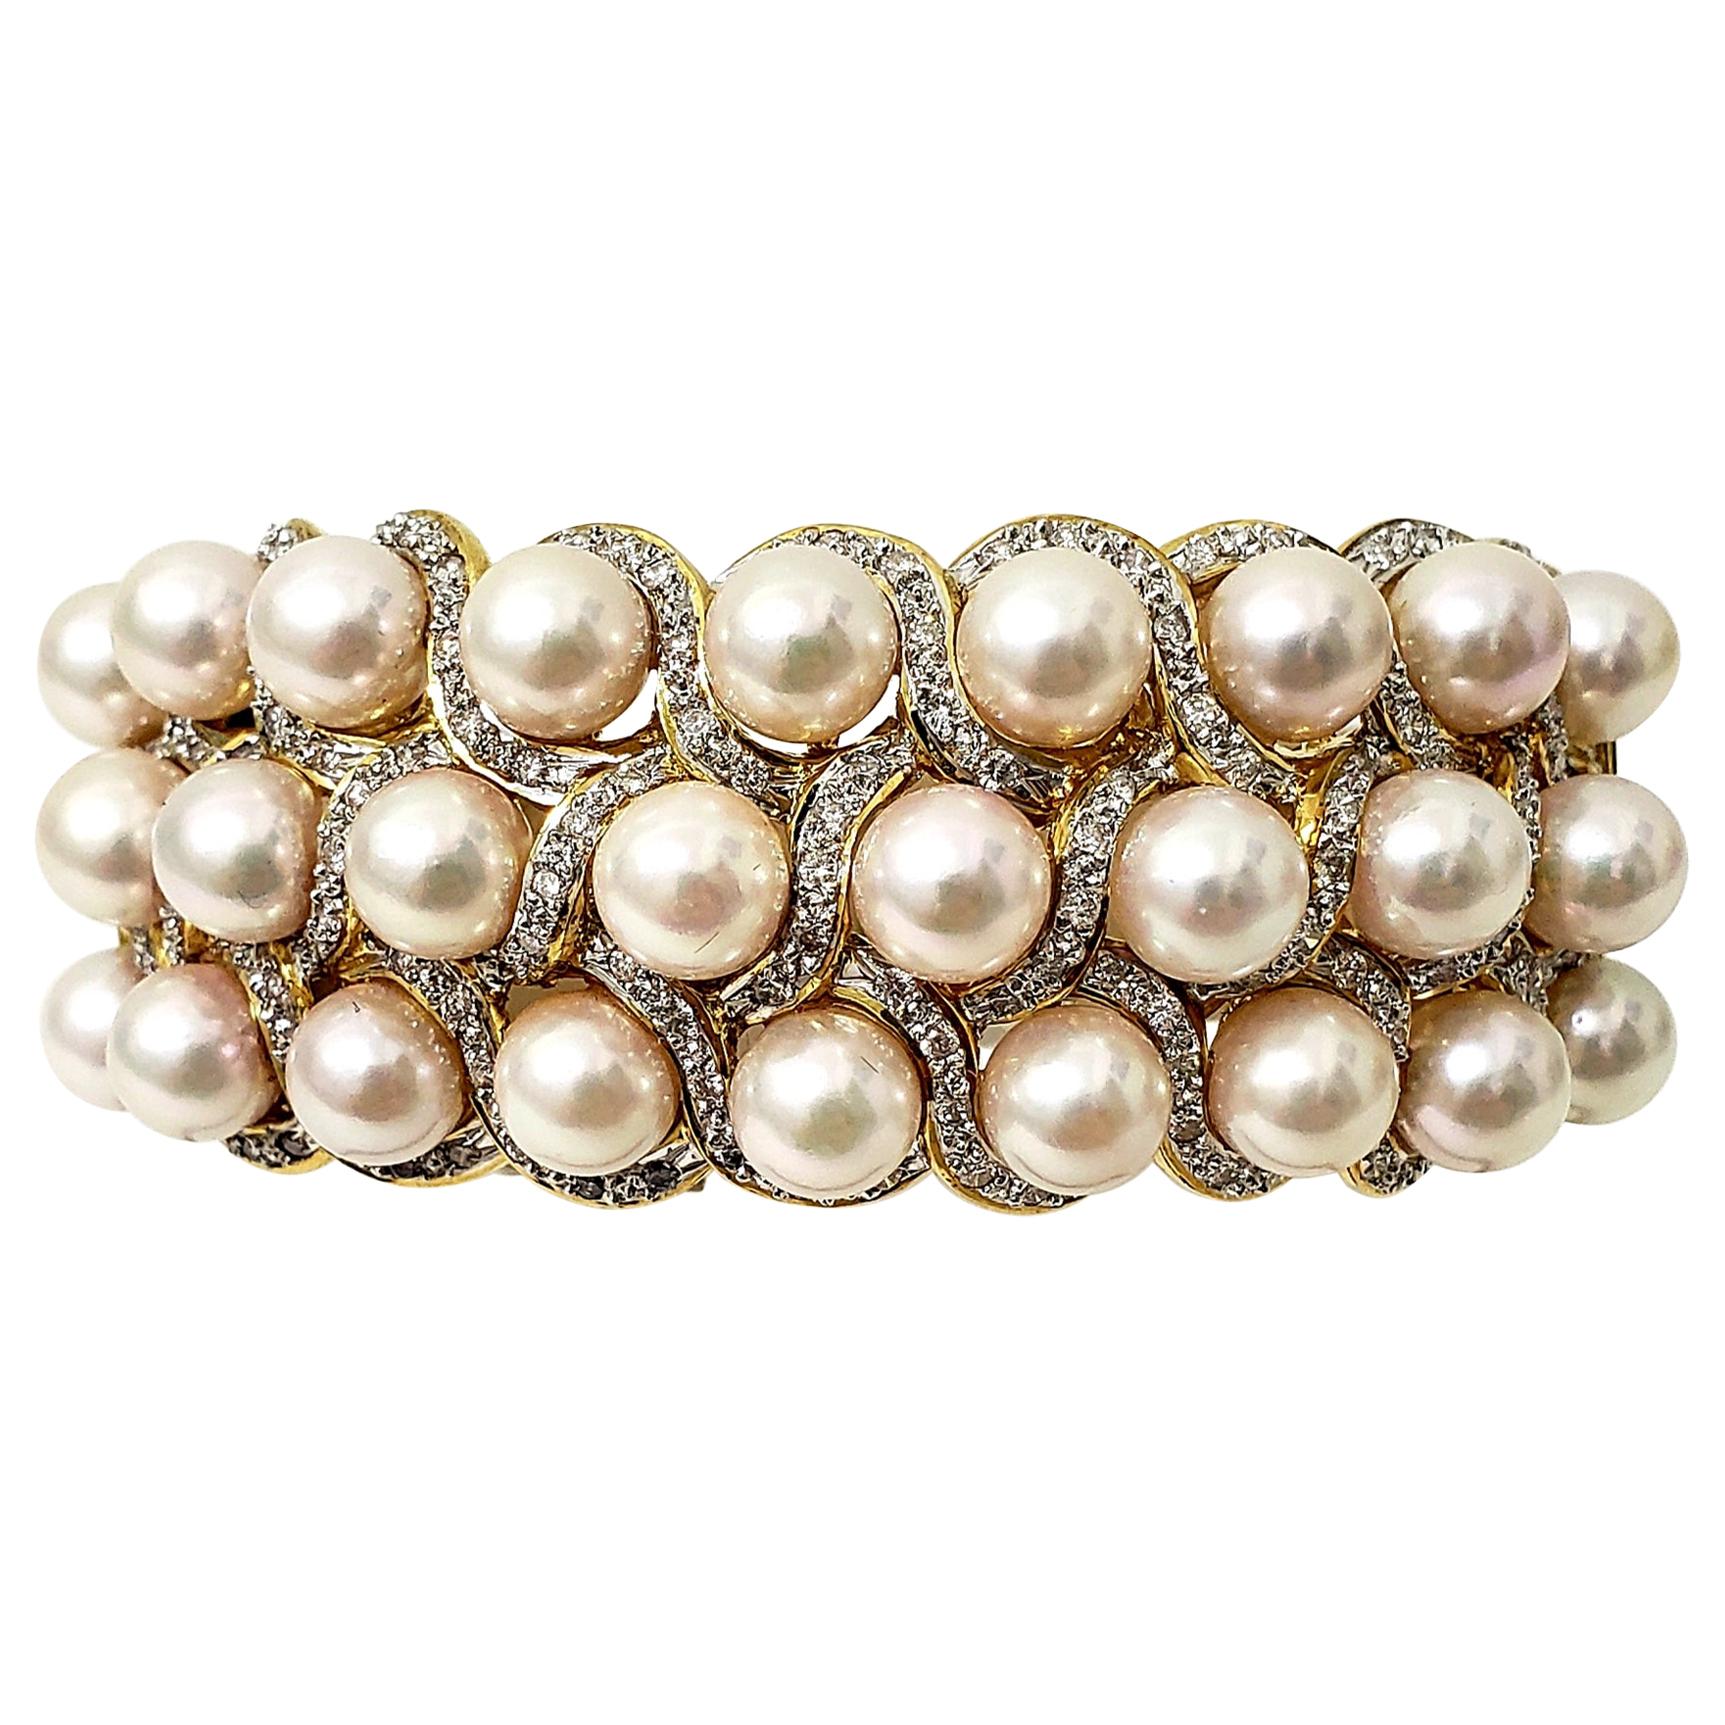 Midcentury Outstanding Luxury Diamonds and Pearls Bangle Handcrafted in 18k Gold For Sale